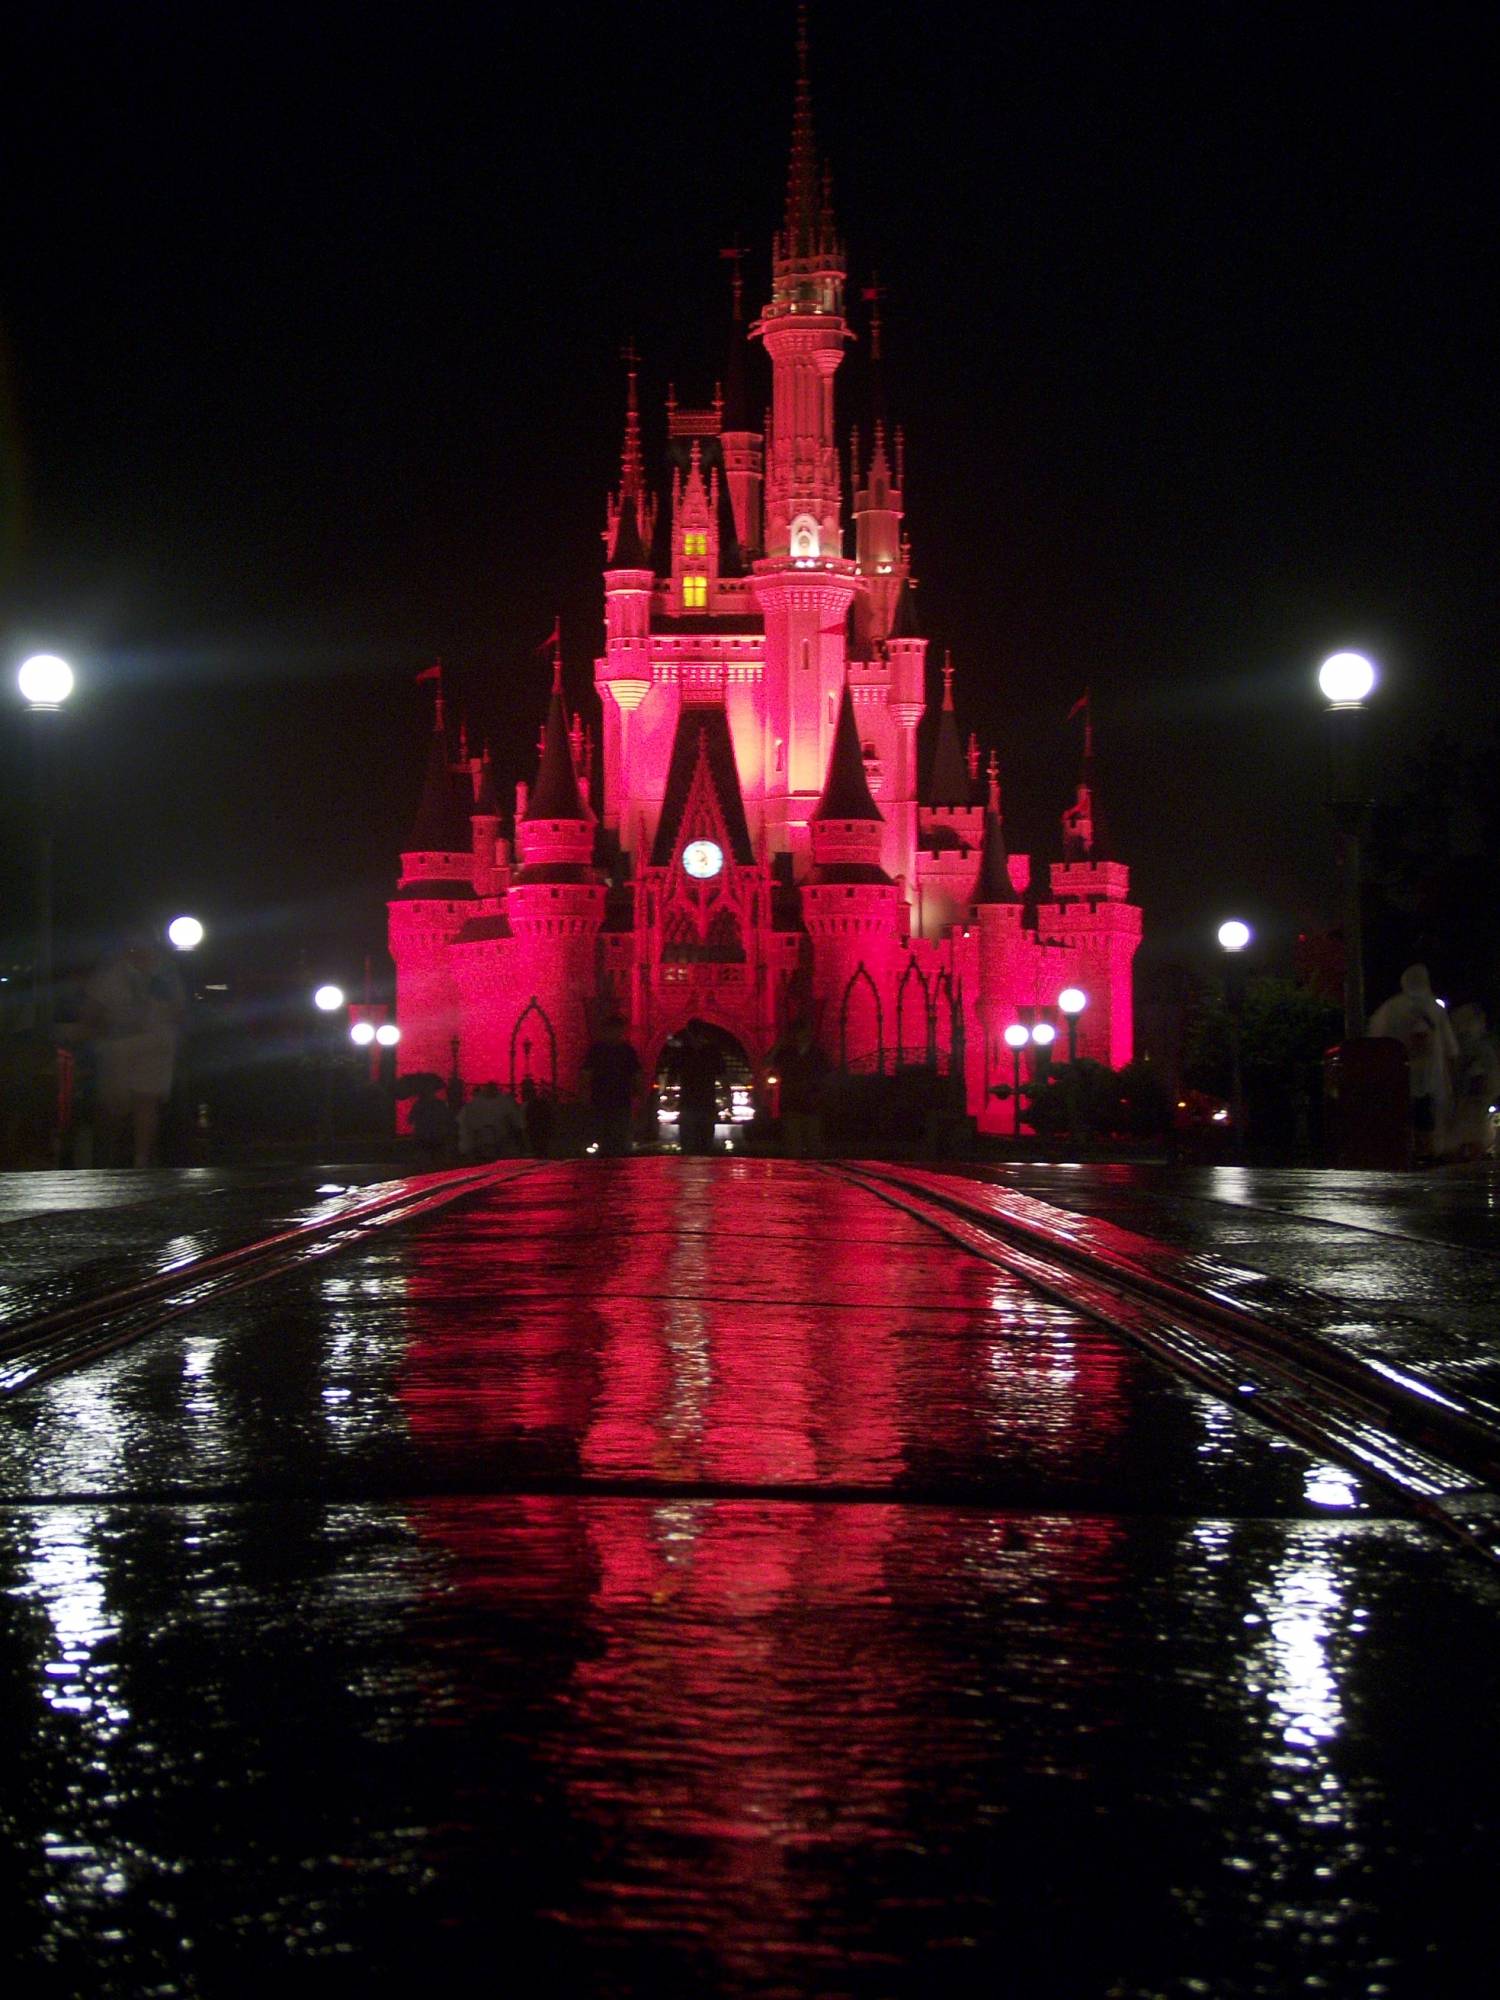 Magic Kingdom - The Castle after a day of rain